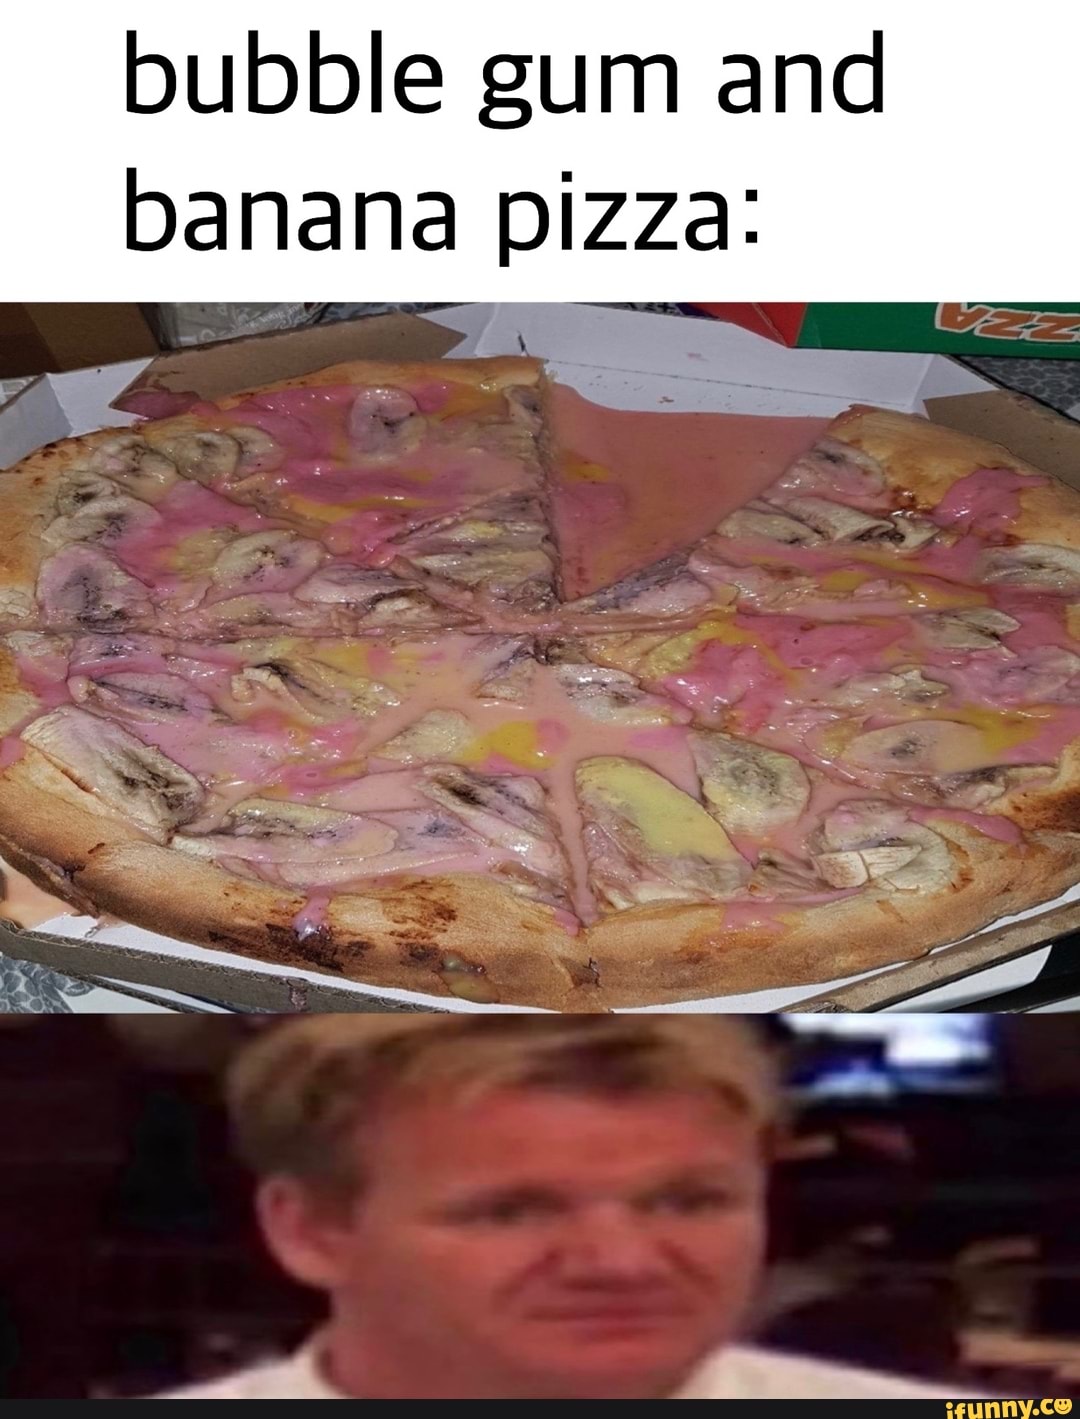 Bubble gum and banana pizza: SS - )